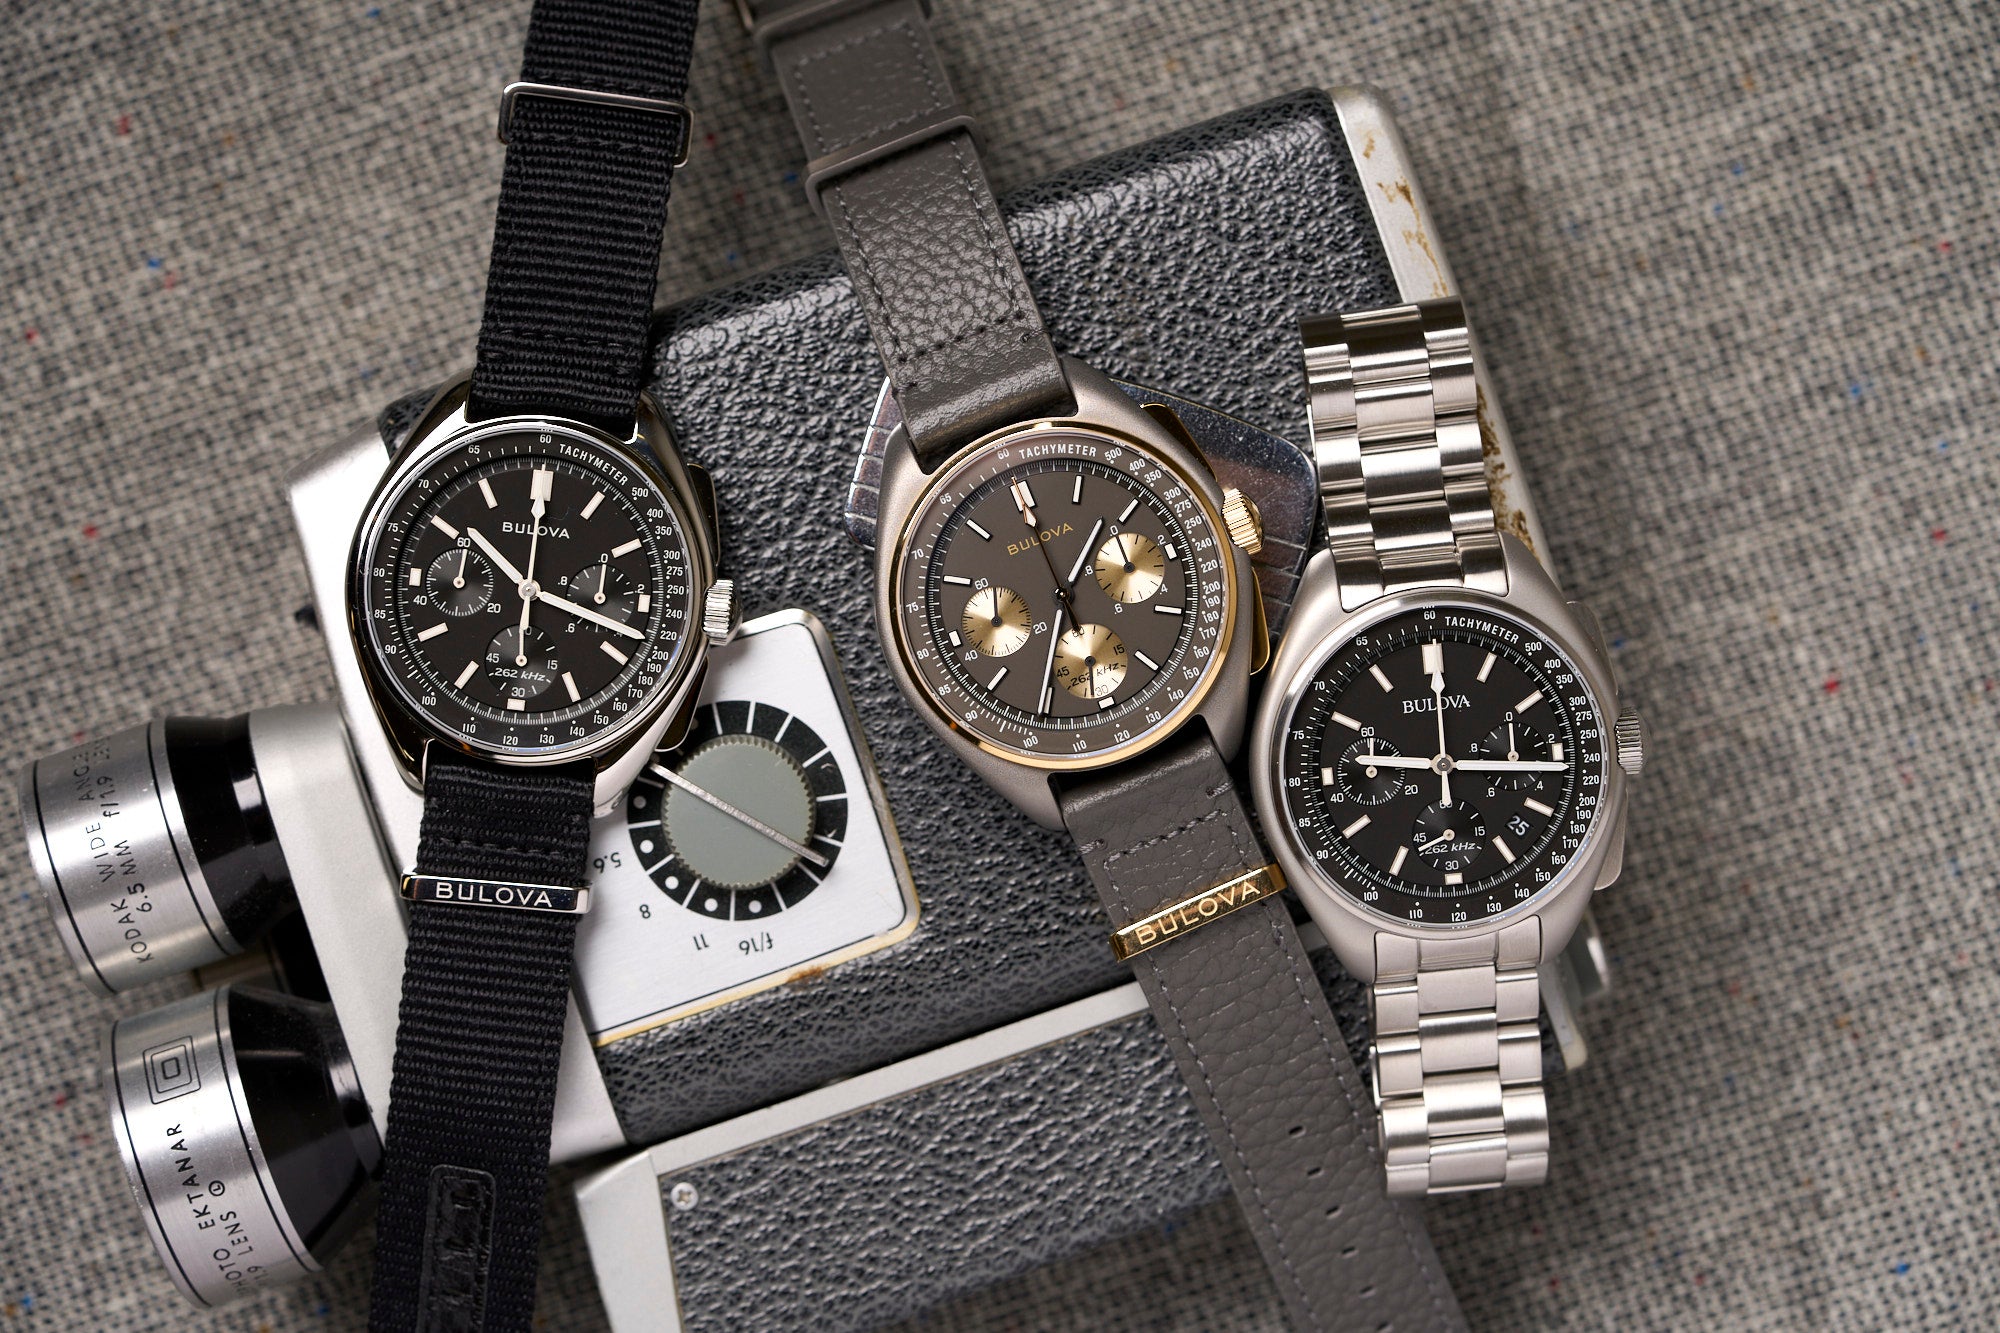 Bulova Watches are Now Available at the Windup Watch Shop